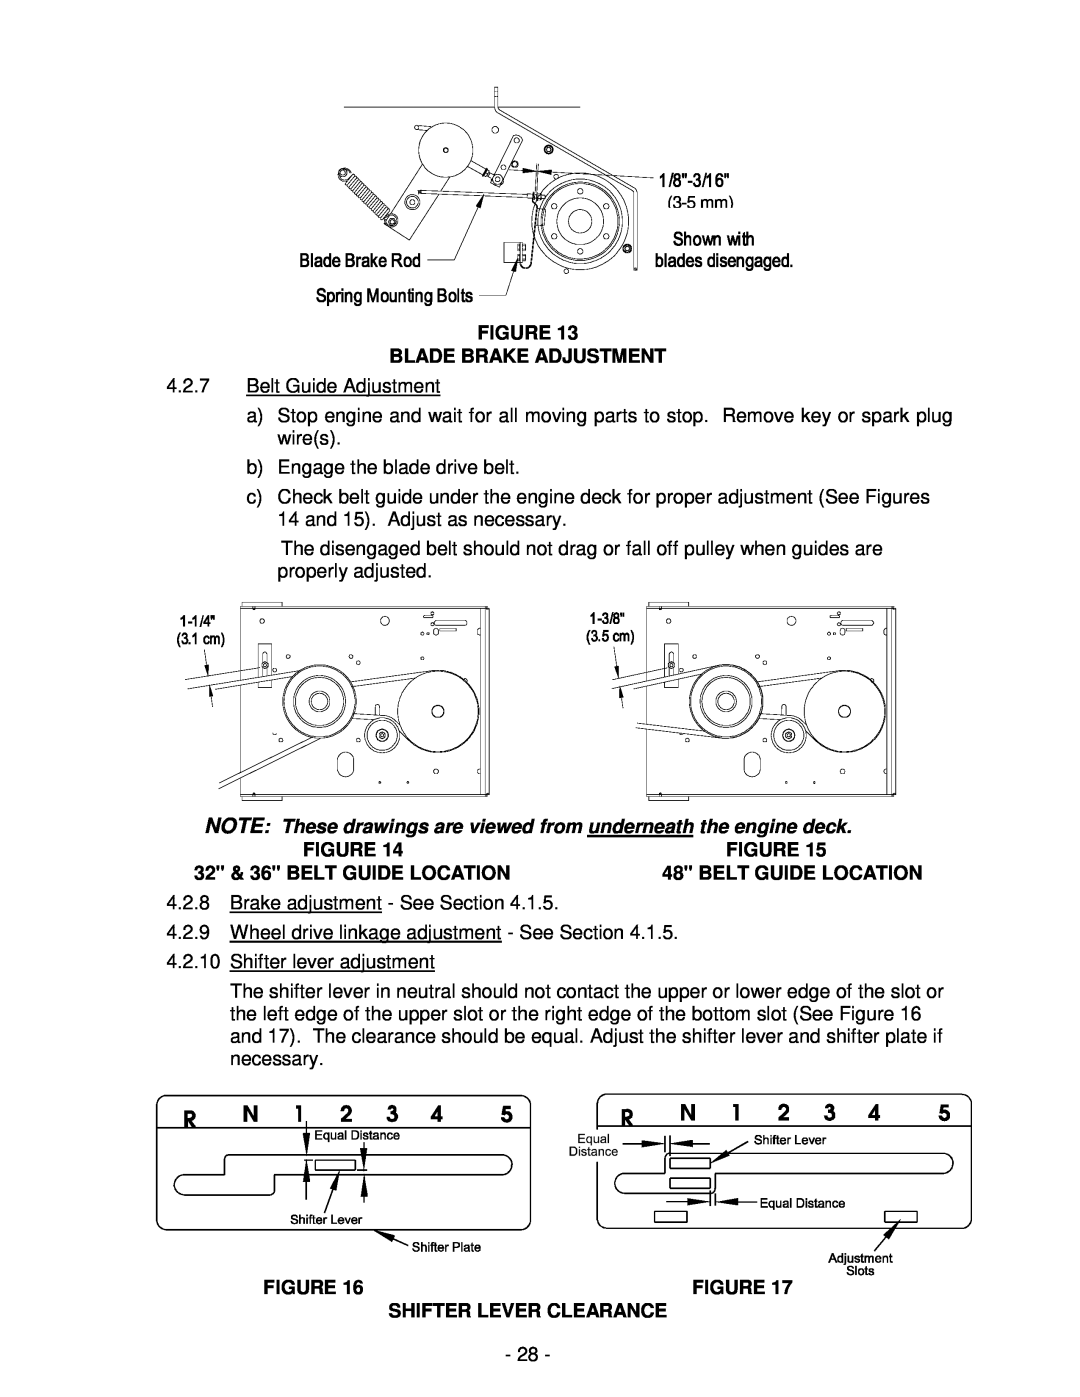 Exmark Lazer ZXS manual 3-5 mm, Blade Brake Adjustment, NOTE These drawings are viewed from underneath the engine deck 